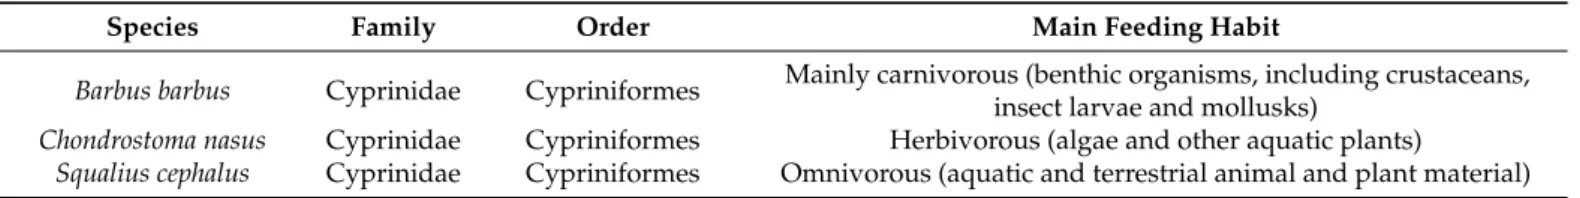 Table 1. Classification and the main feeding habits of fish species sampled from the Crișul Negru river. 